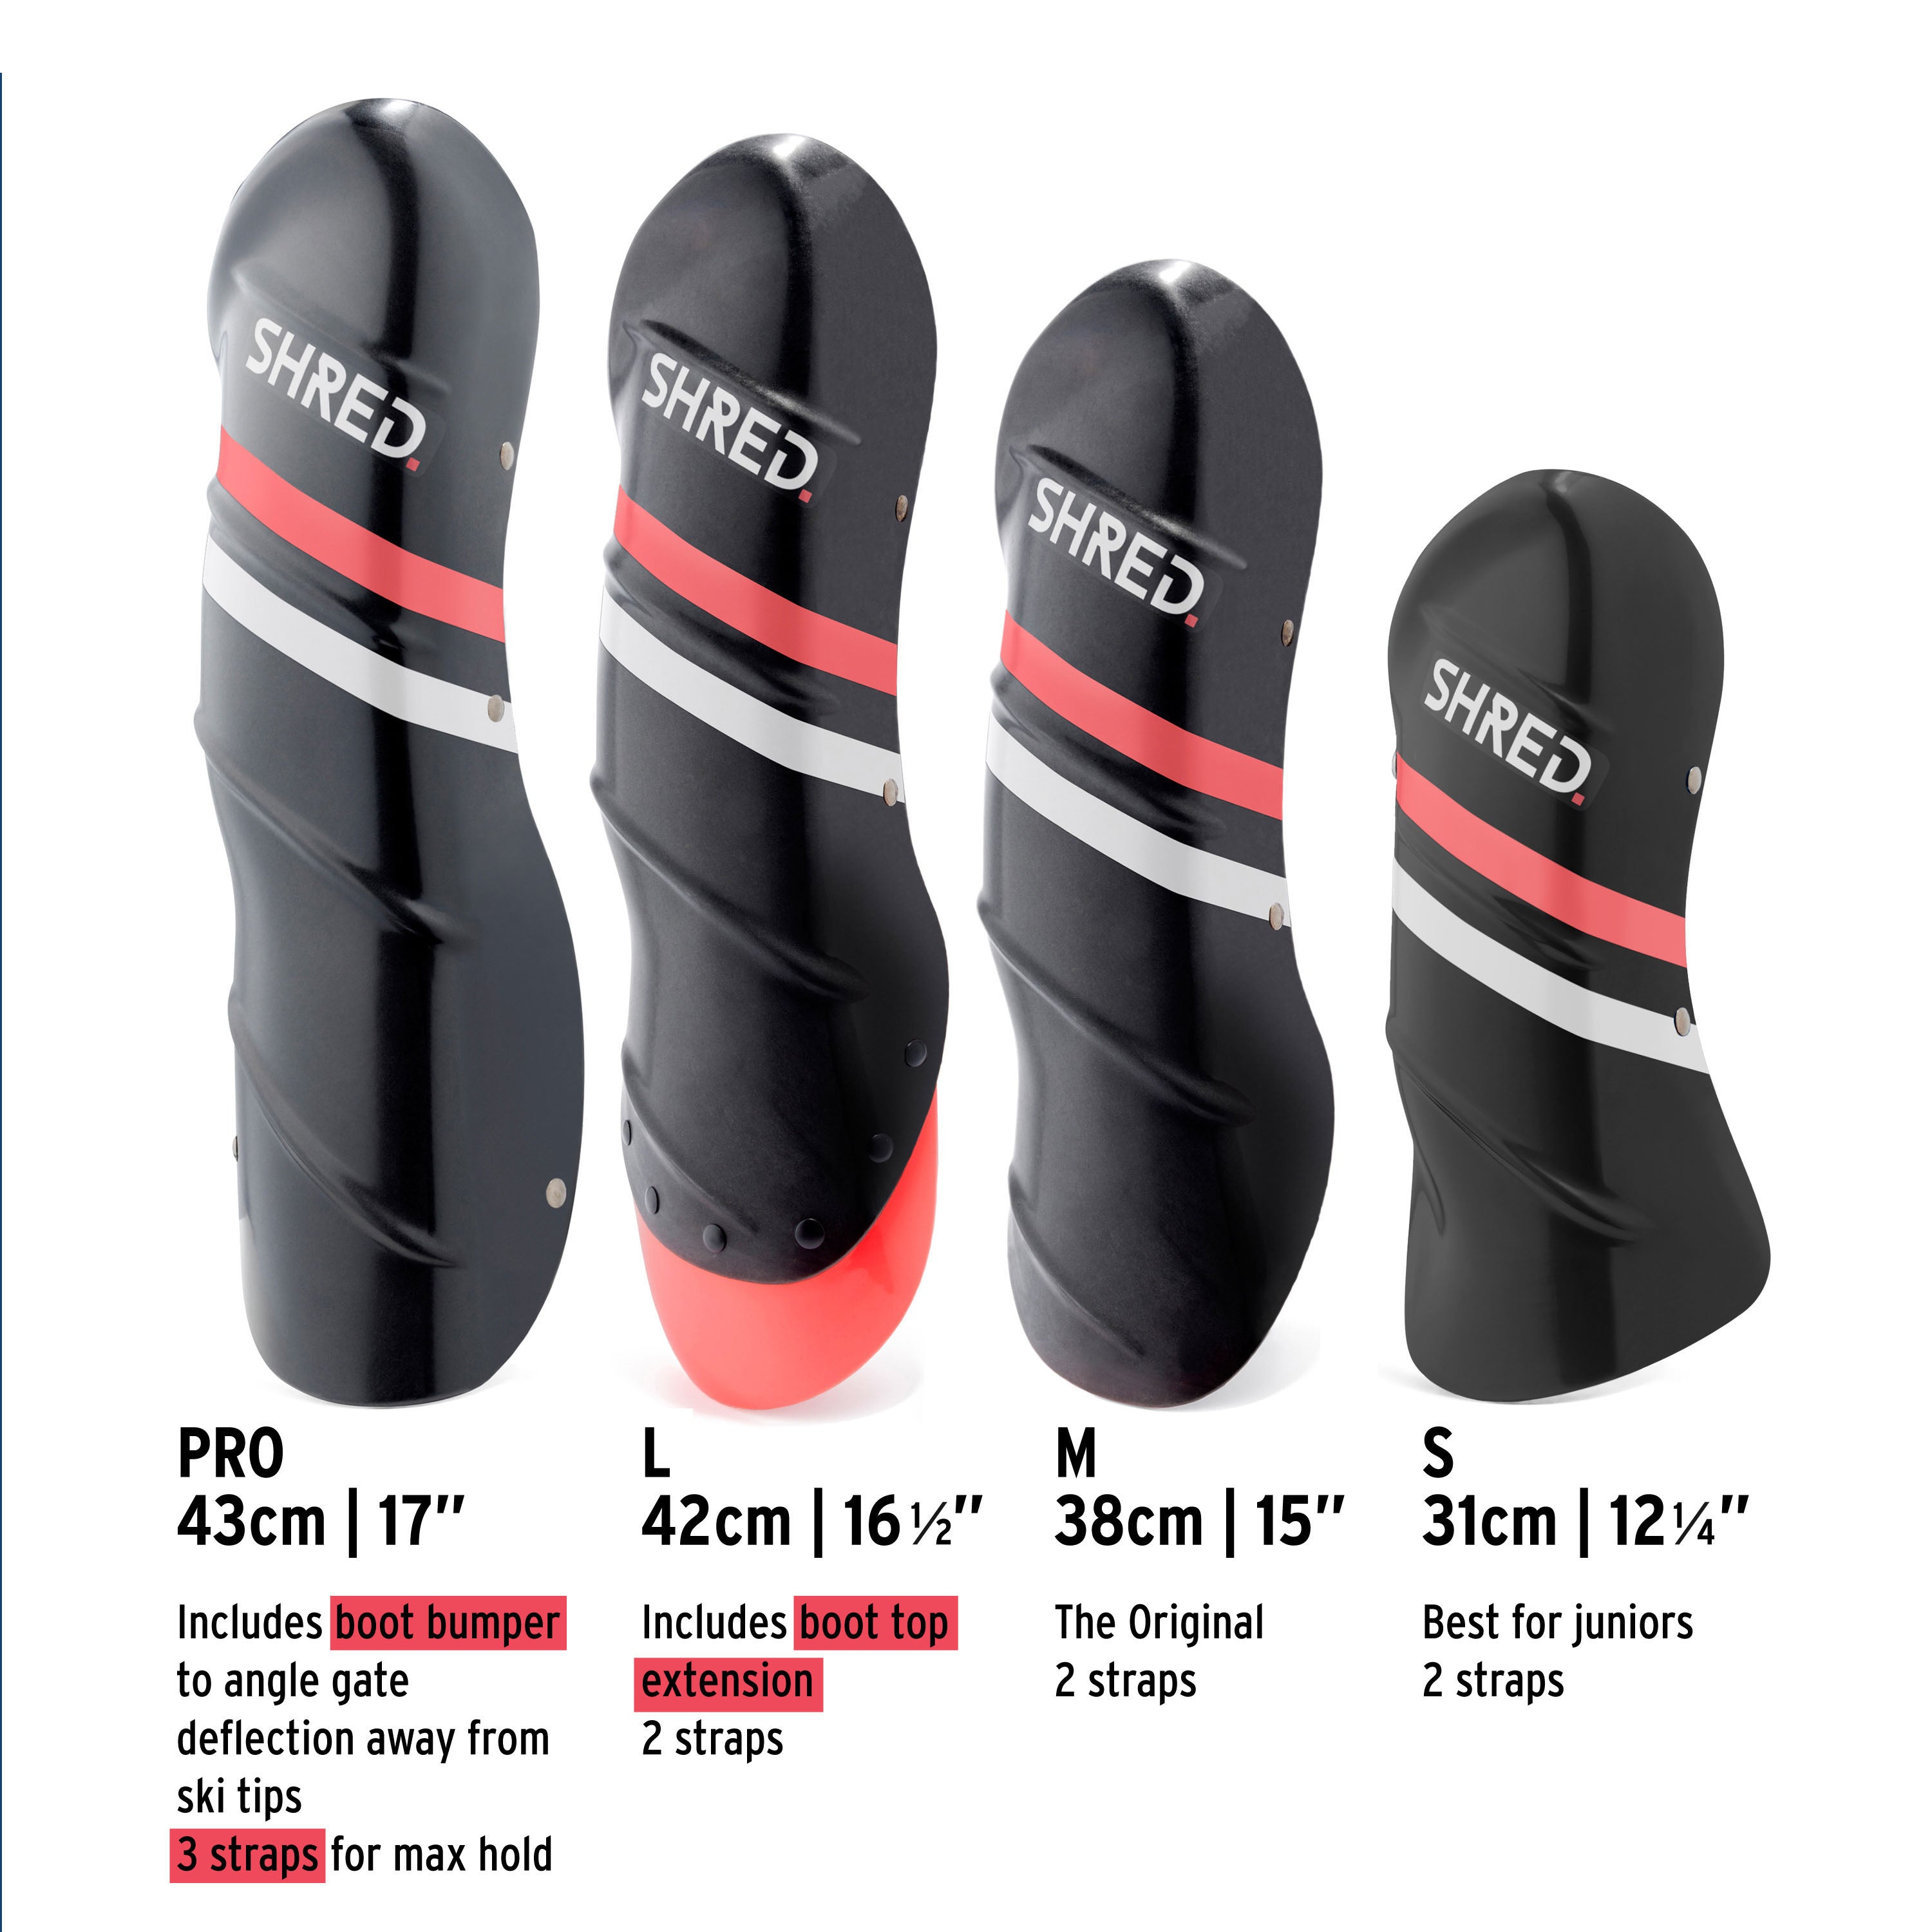 Why Should I Wear Carbon Fiber Shin Guards? [2021 Buying Guide